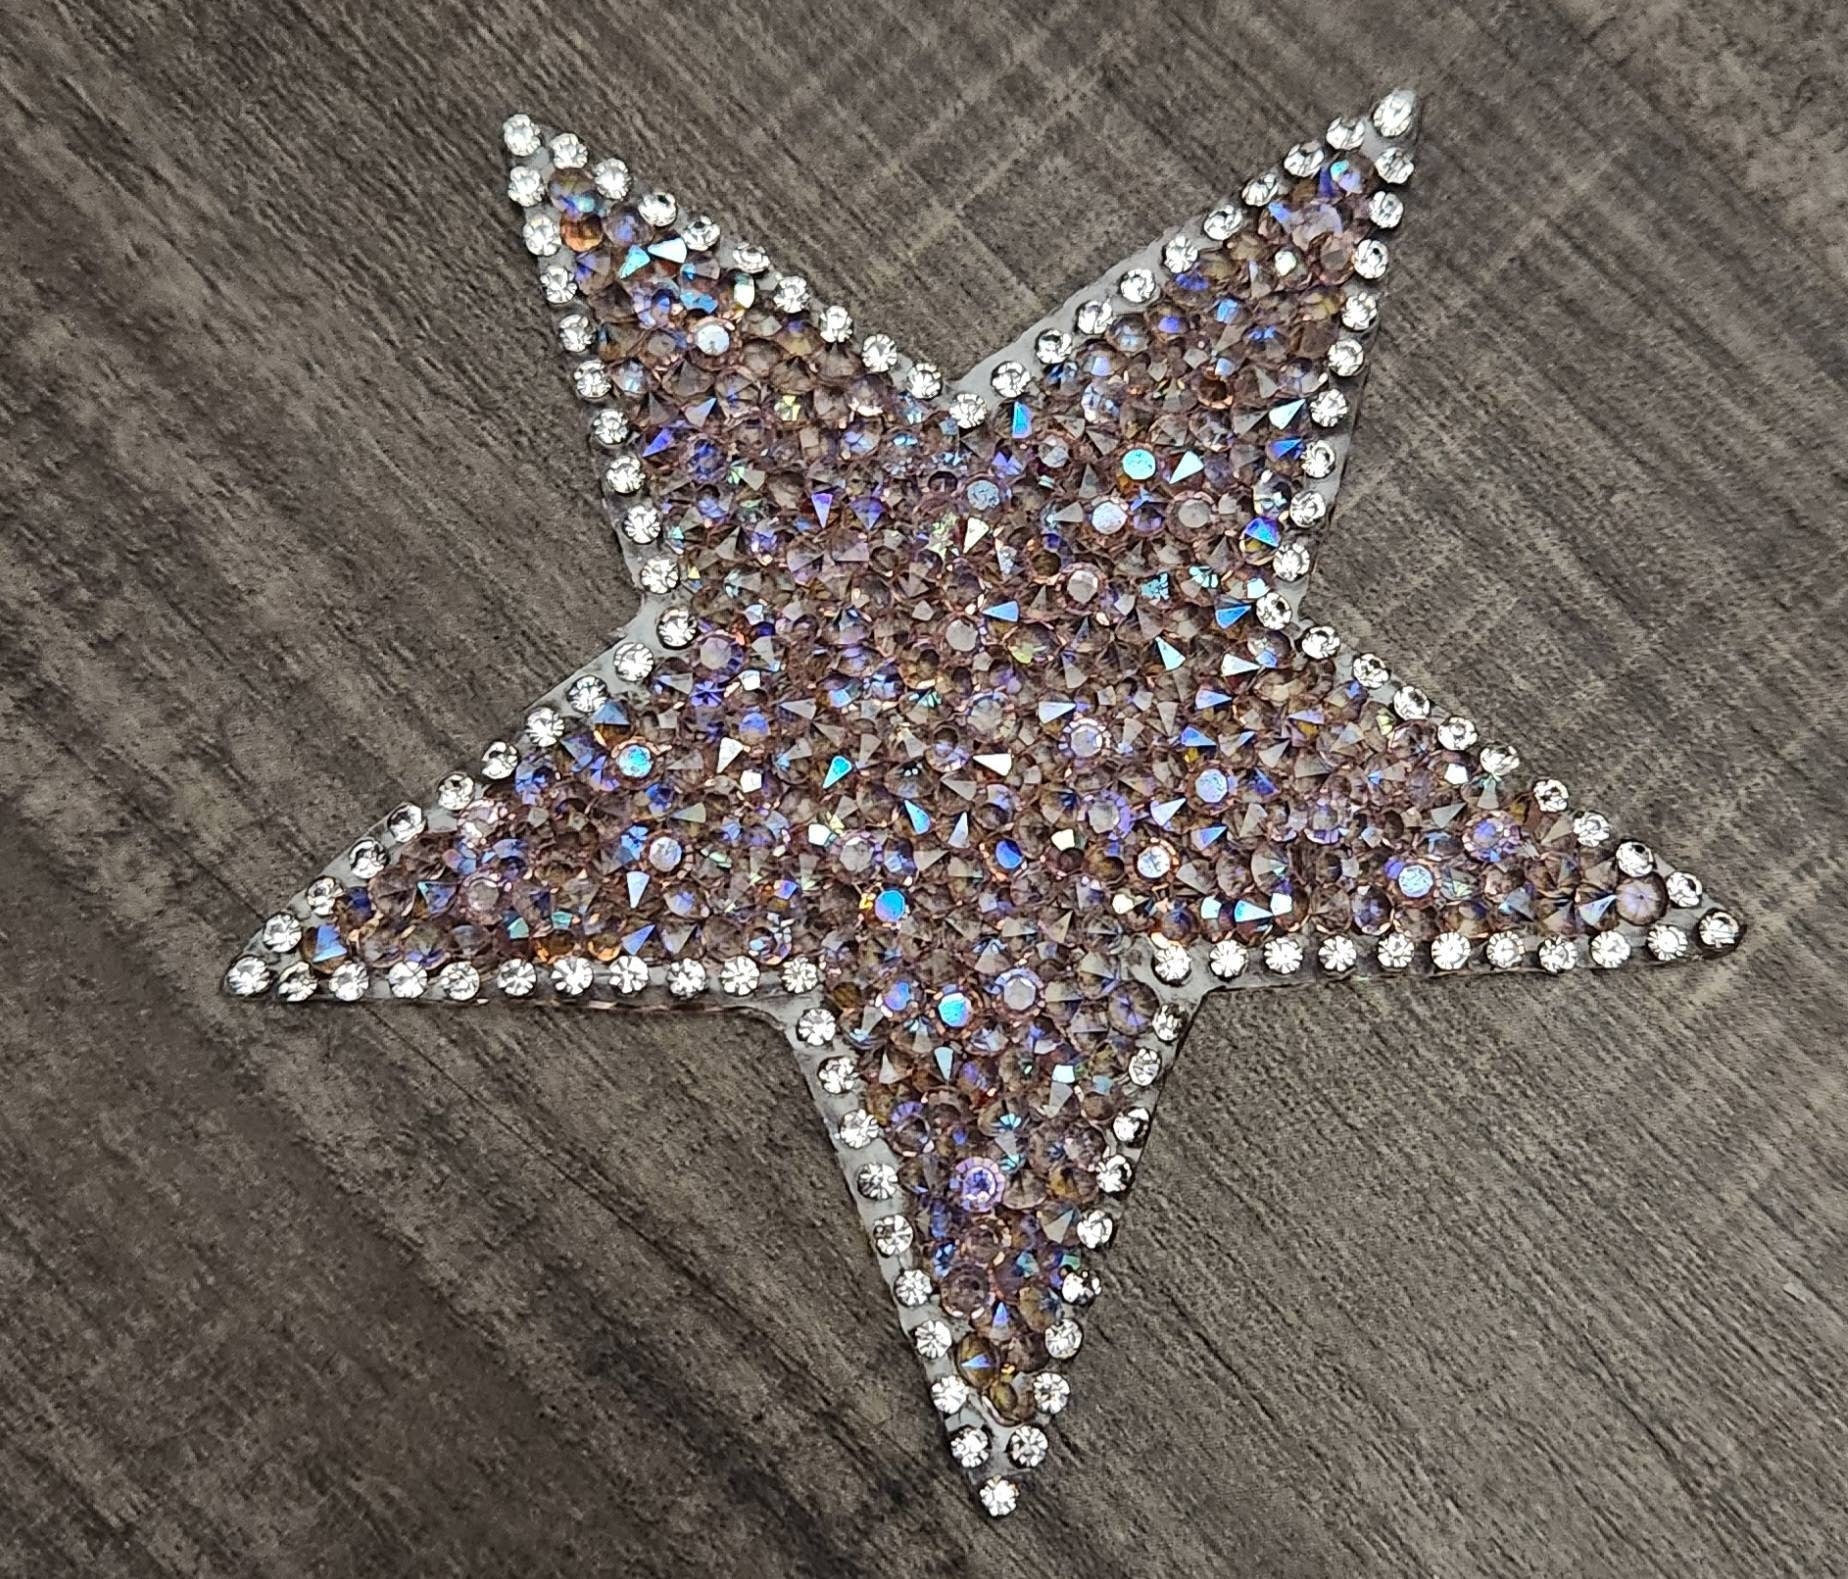 New, LIGHT Pink AB Rhinestone "Star" Bling Patch, Size 3", Cool Applique For Clothing, Iron-on Patch, Small Patch for Jackets, DIY Projects